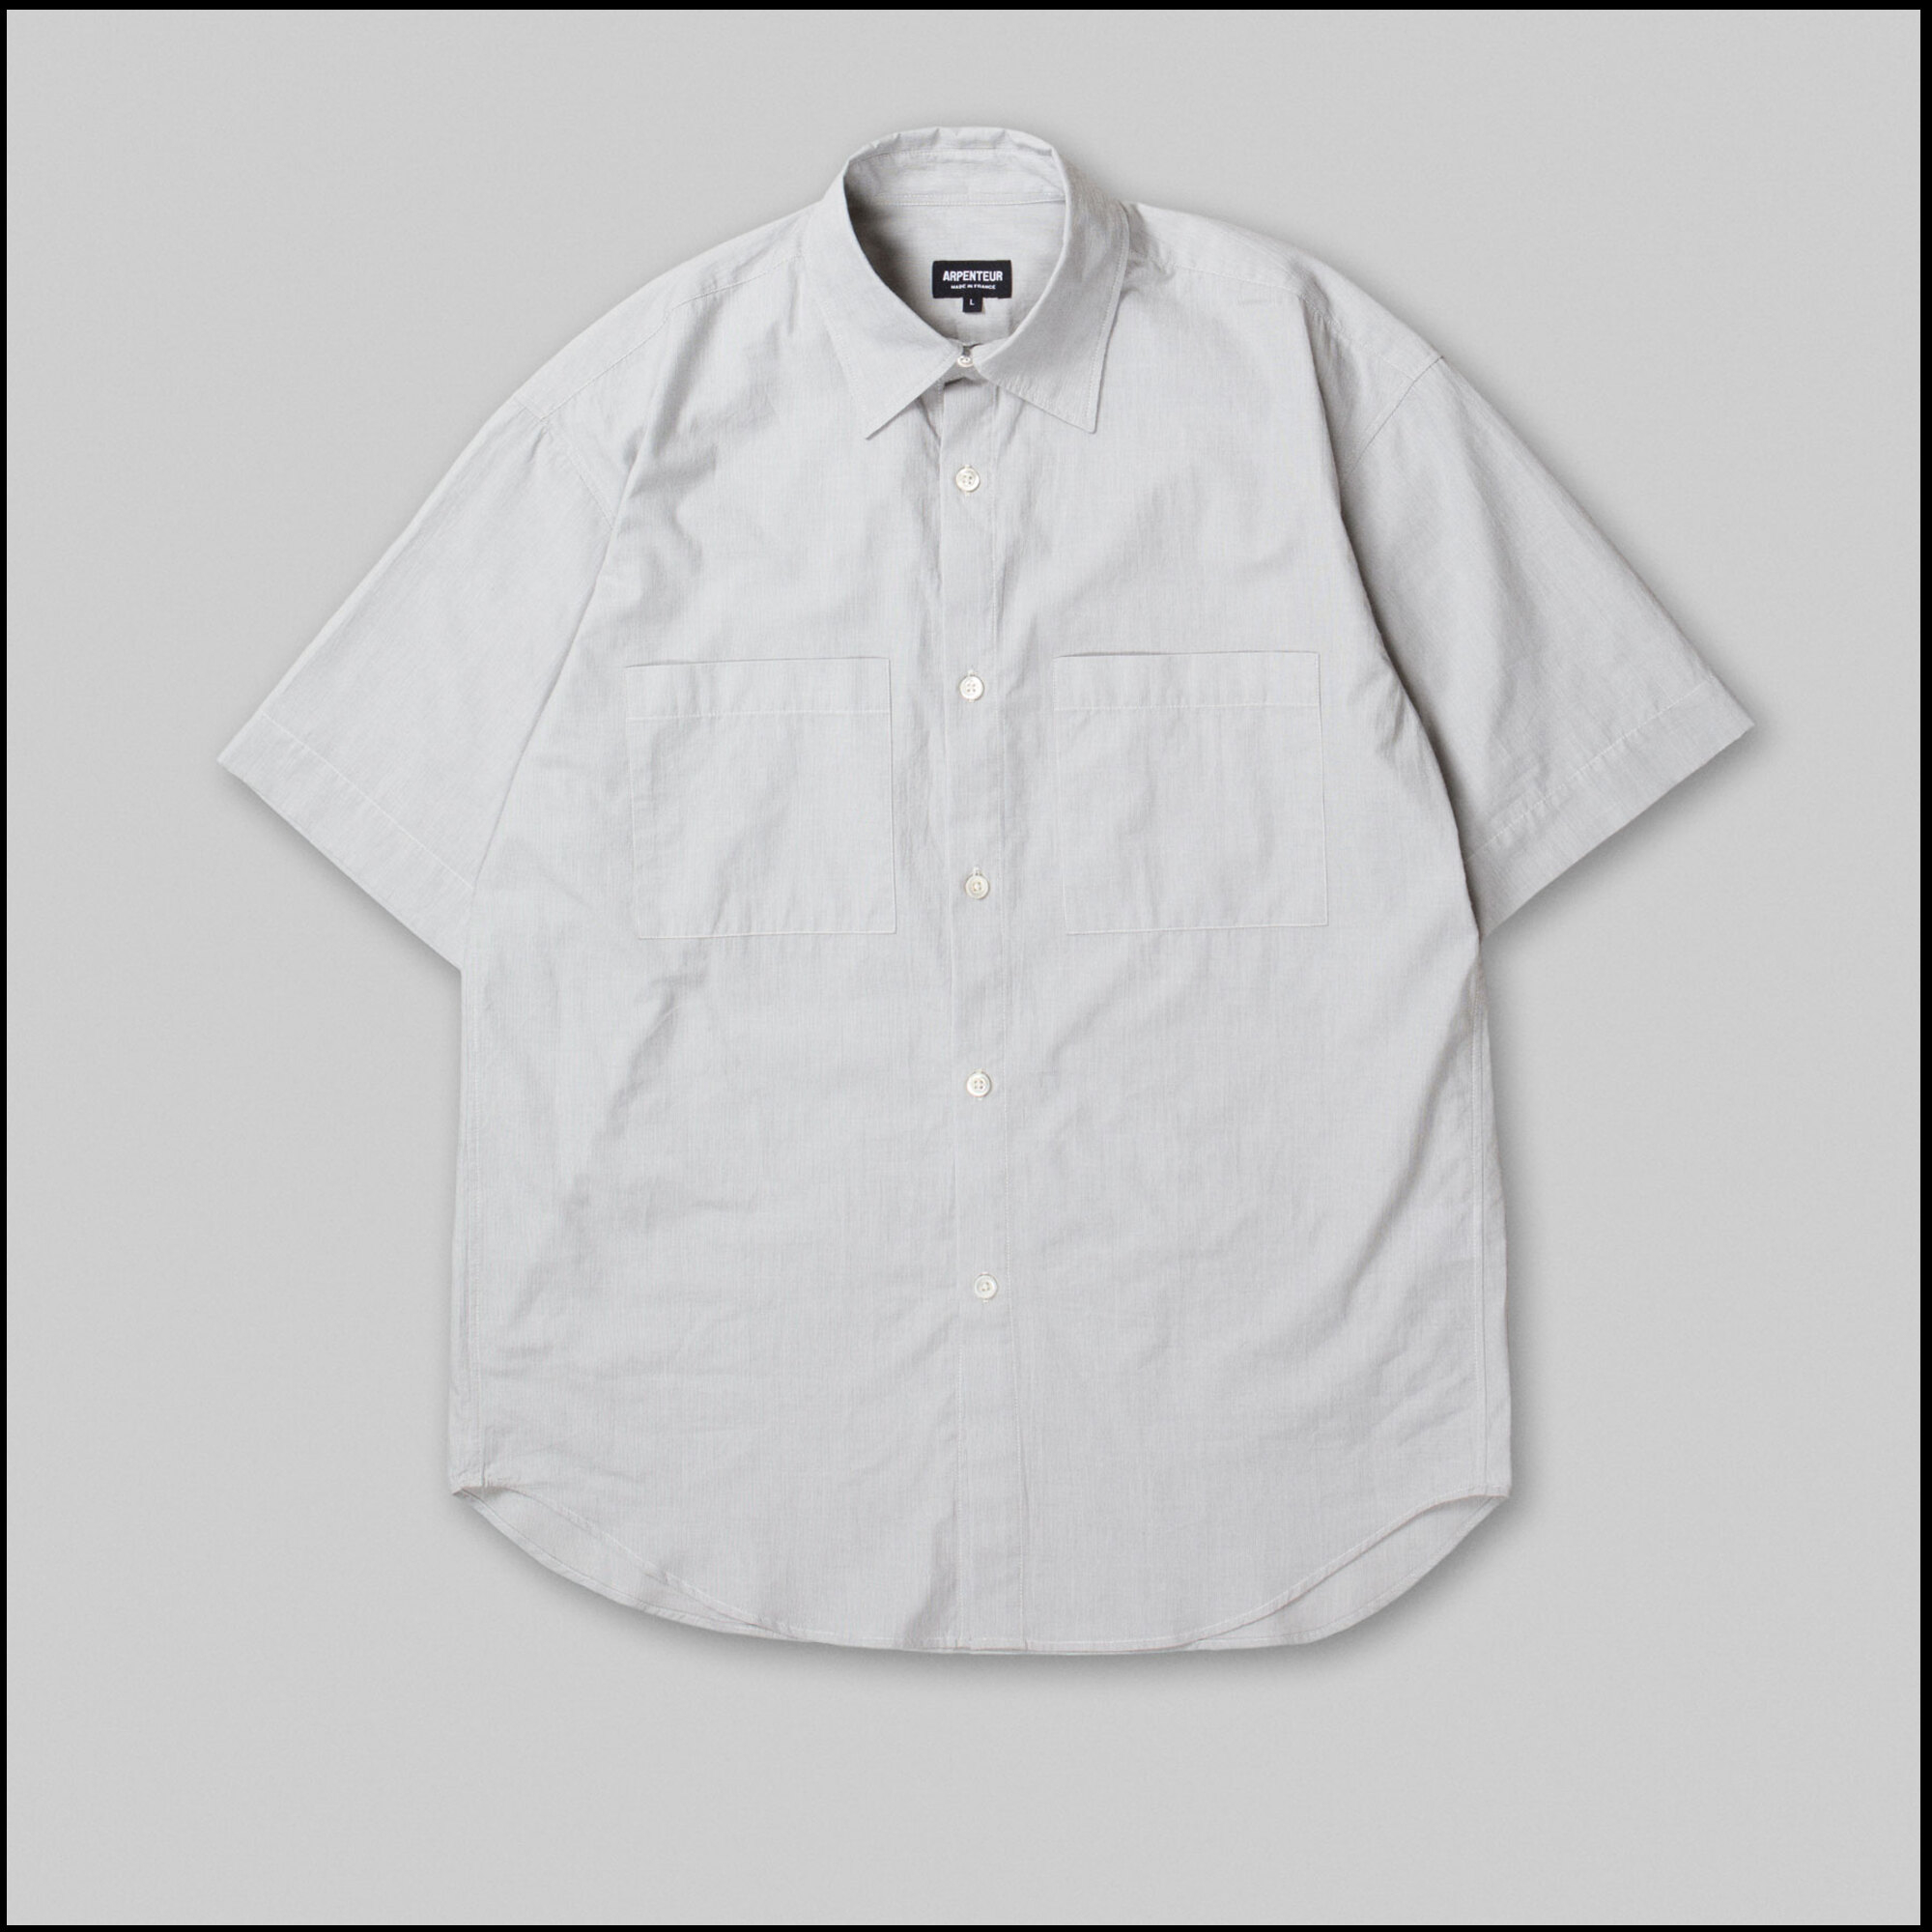 STEREO shirt by Arpenteur in Grey color